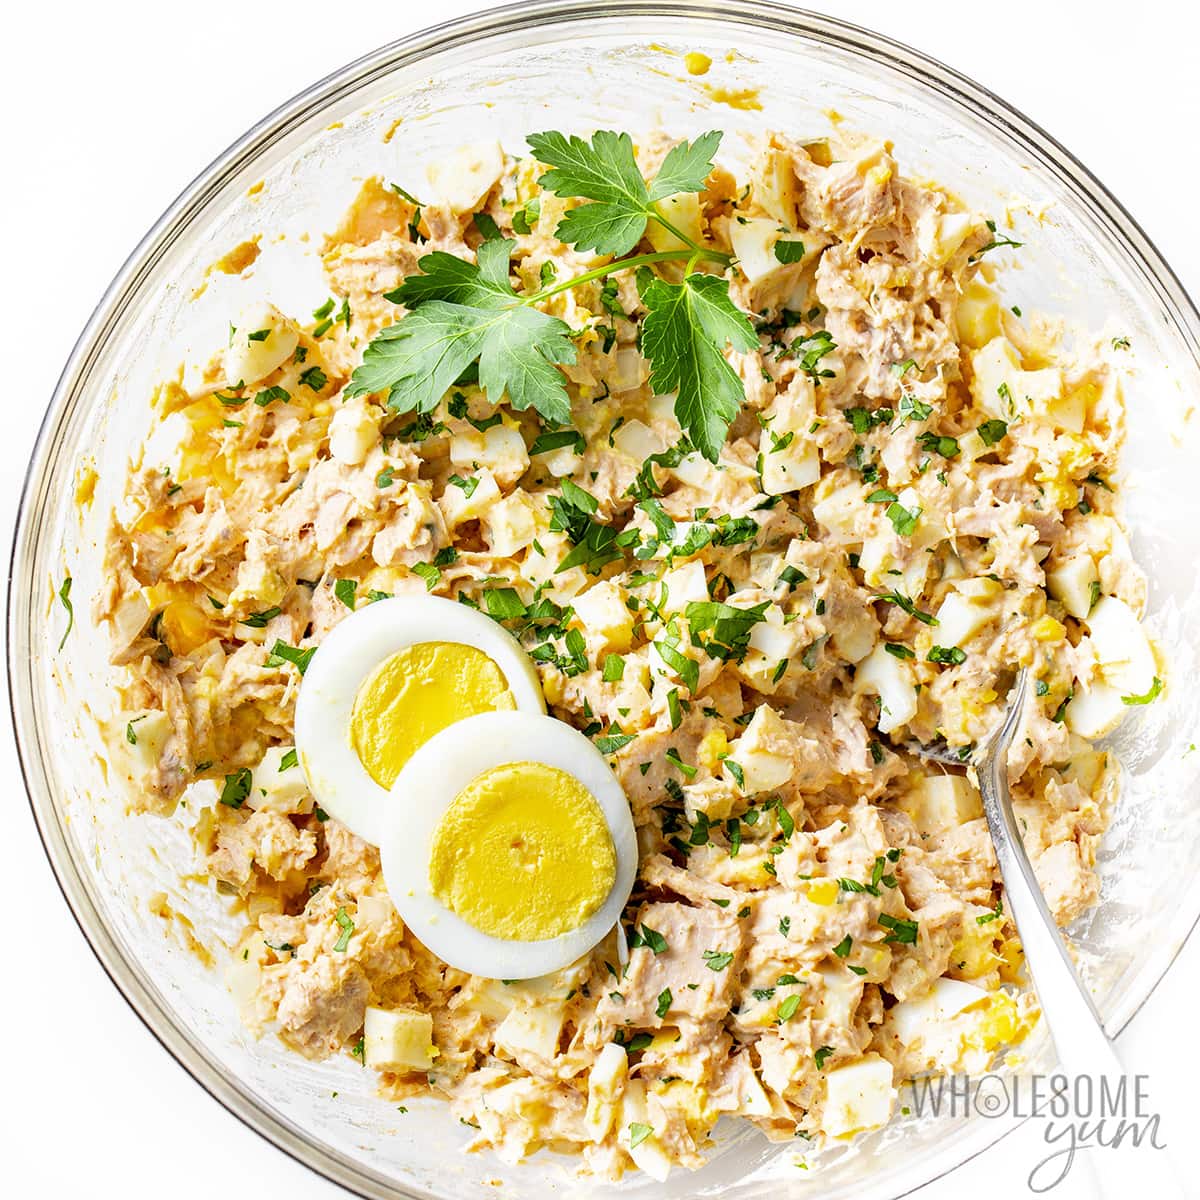 Tuna salad with egg recipe in a bowl.